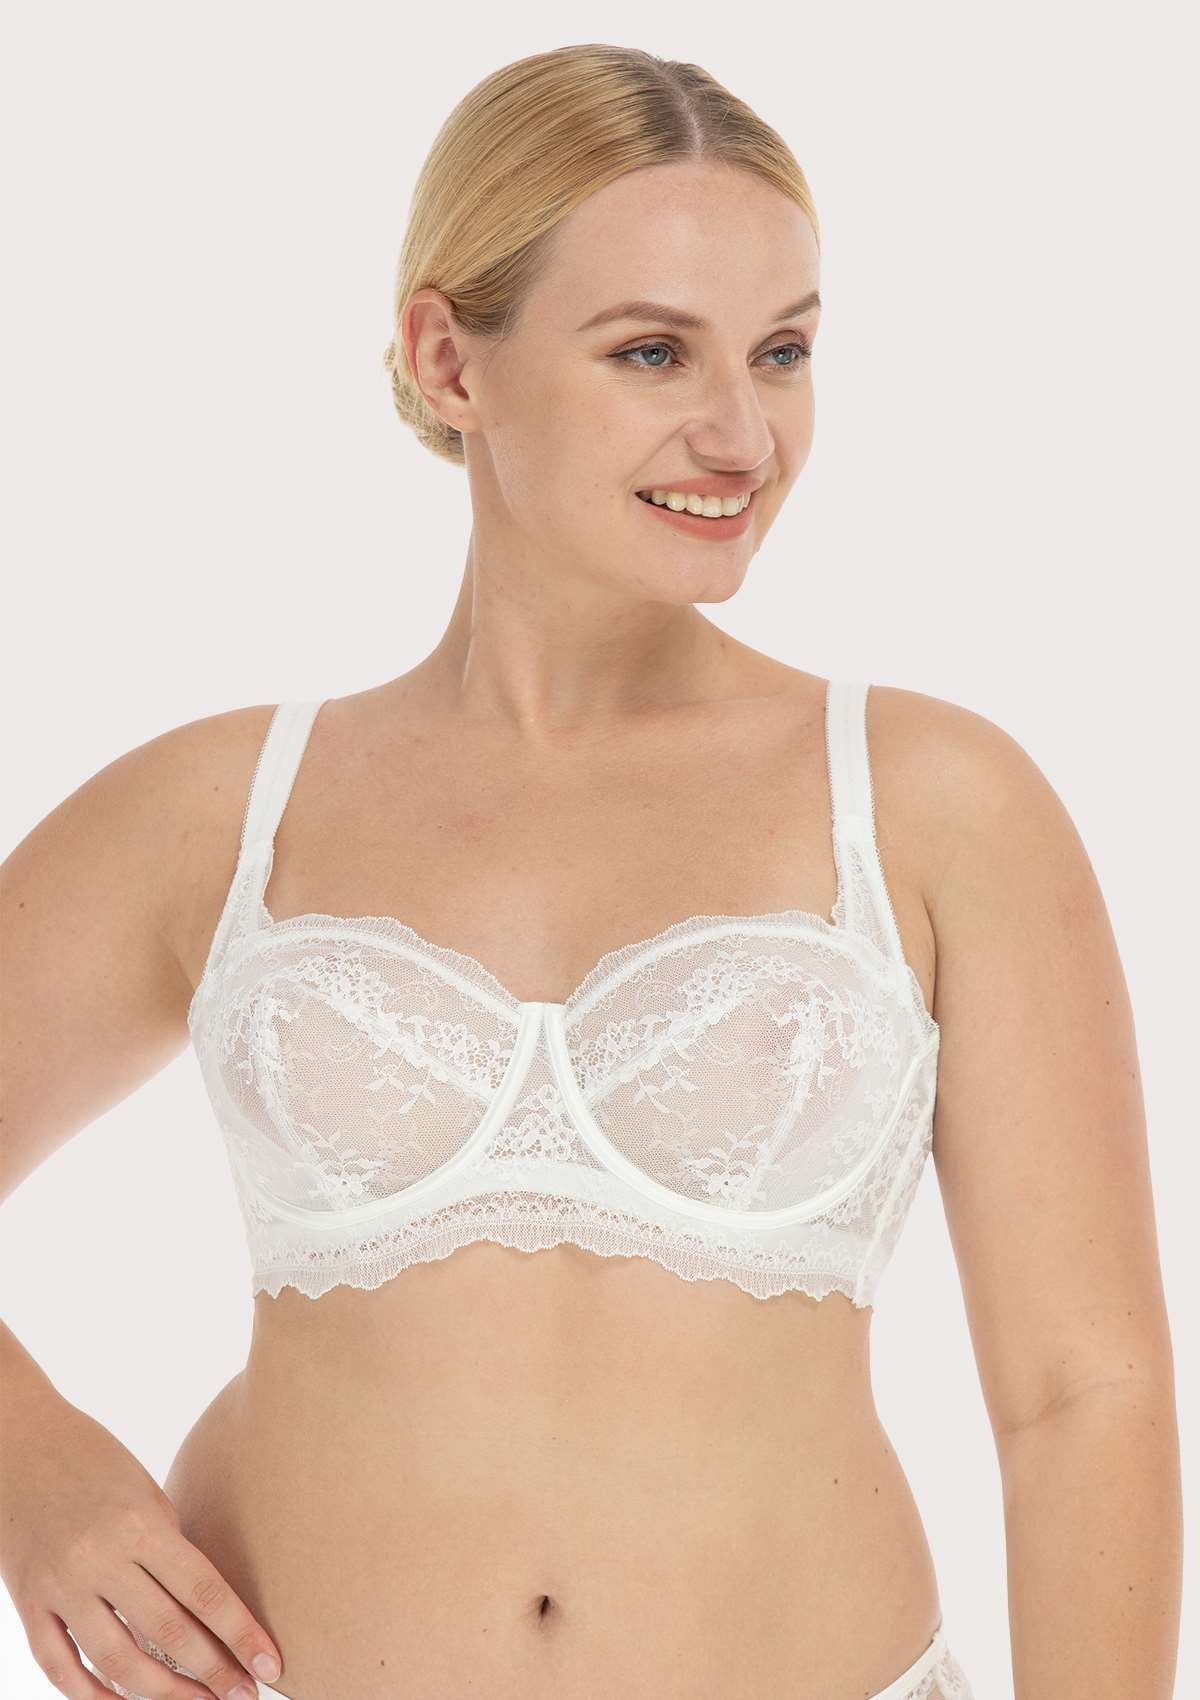 HSIA I Do Floral Lace Bridal Balconette Beautiful Bra For Special Day - White / 36 / C